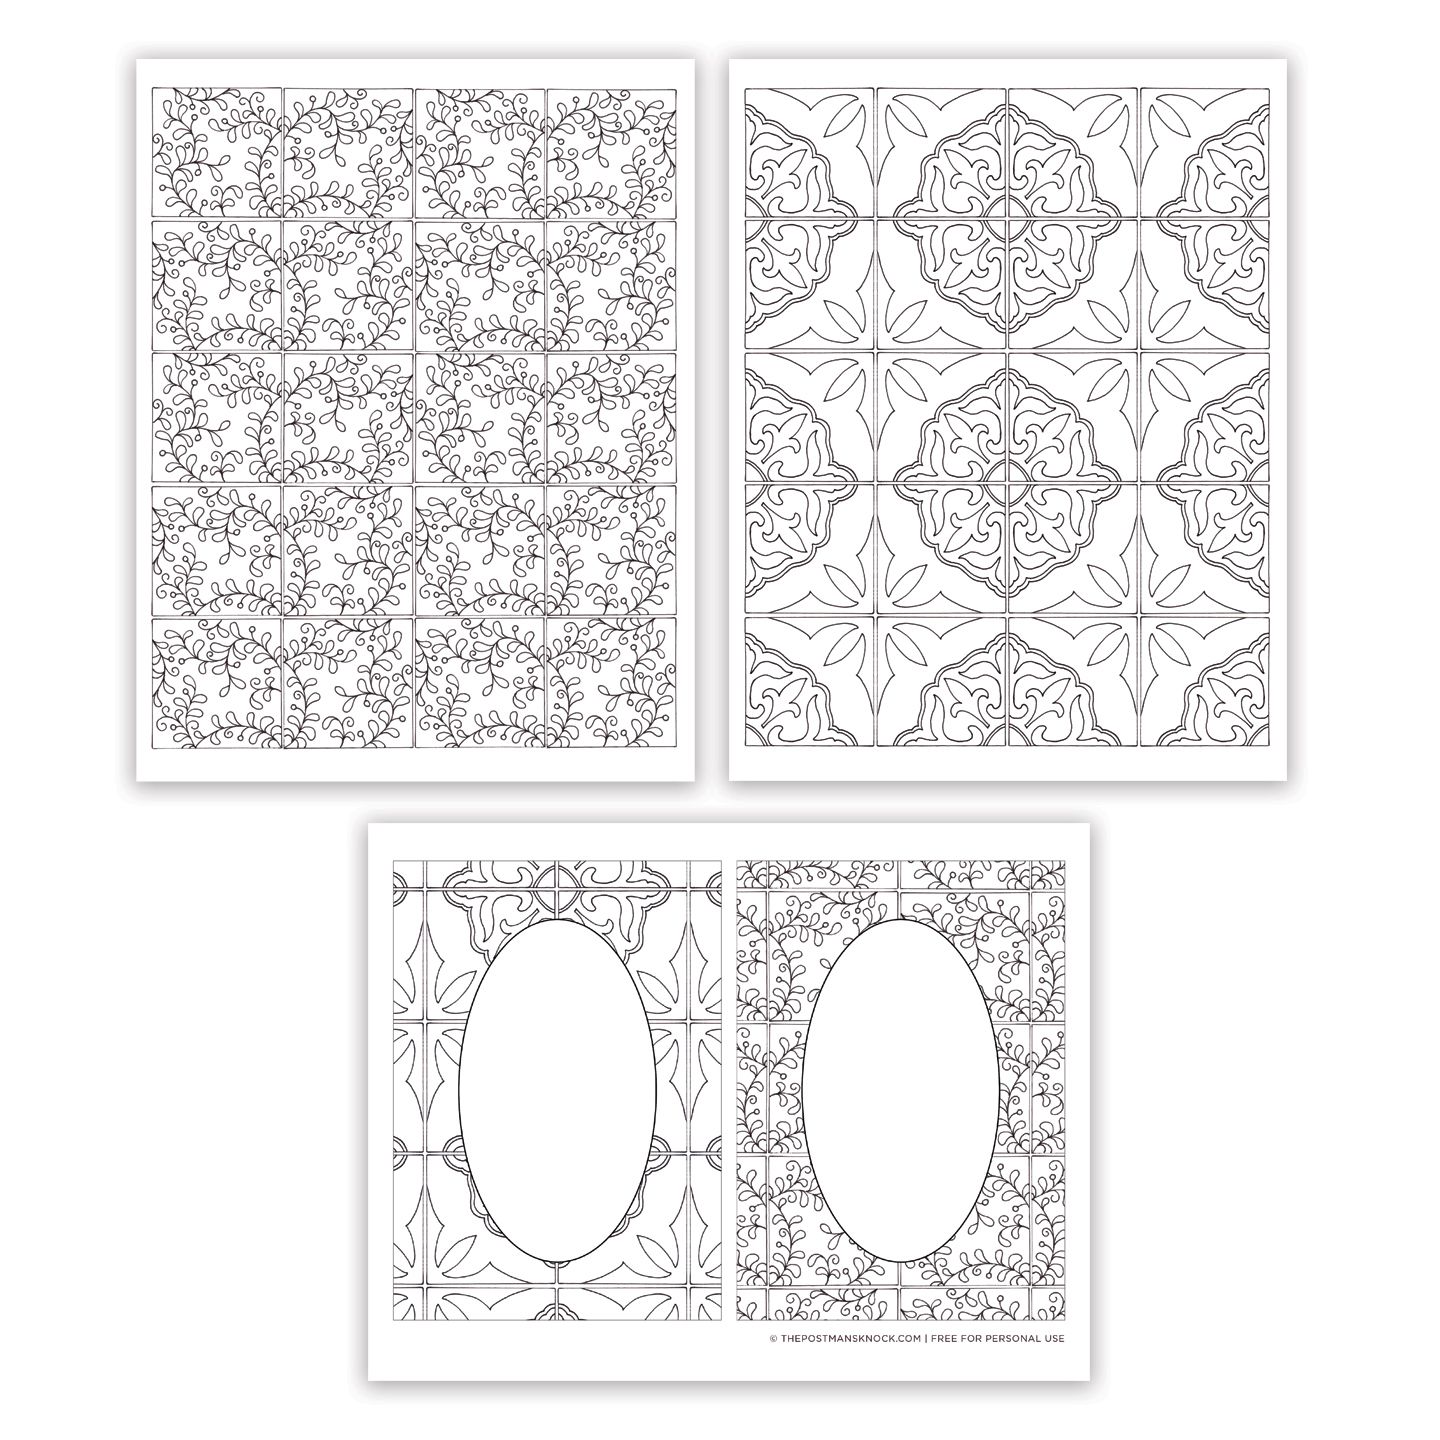 Tiles Coloring Pages - Coloring Home